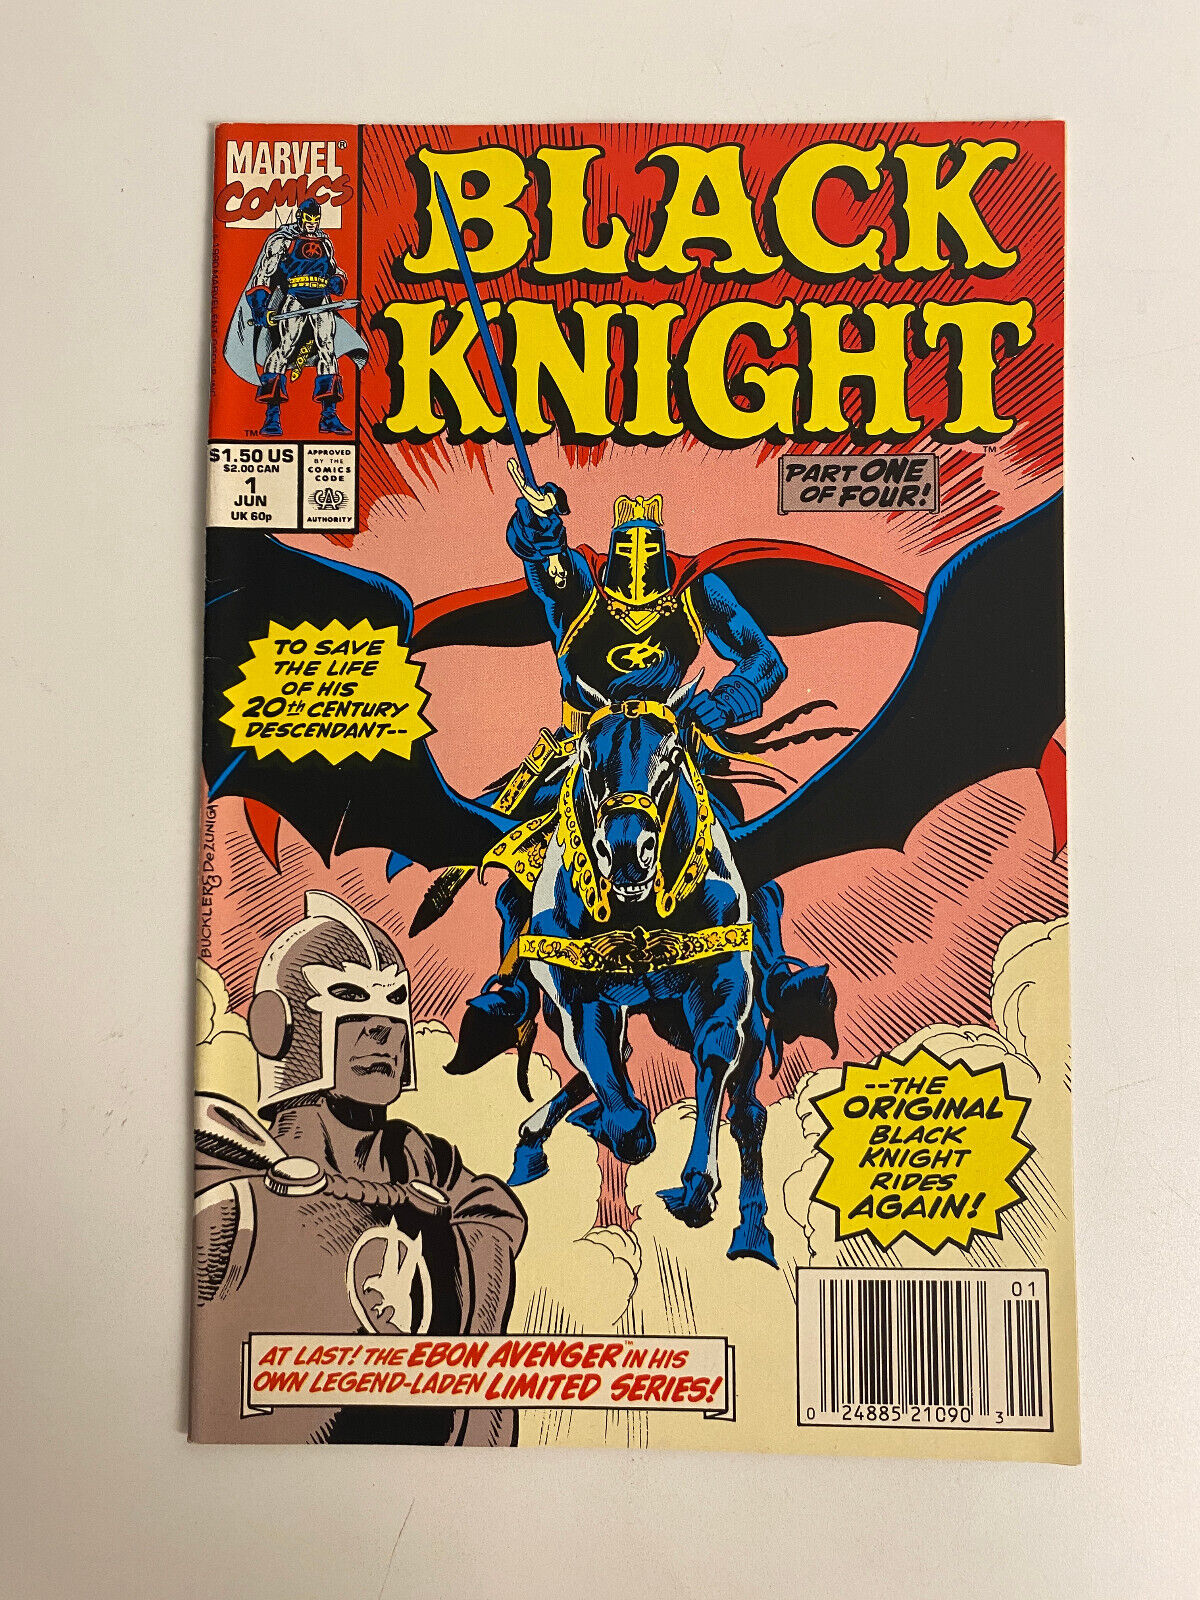 Black Knight #1 (1990, Marvel) 1st solo series featuring Black Knight Newsstand